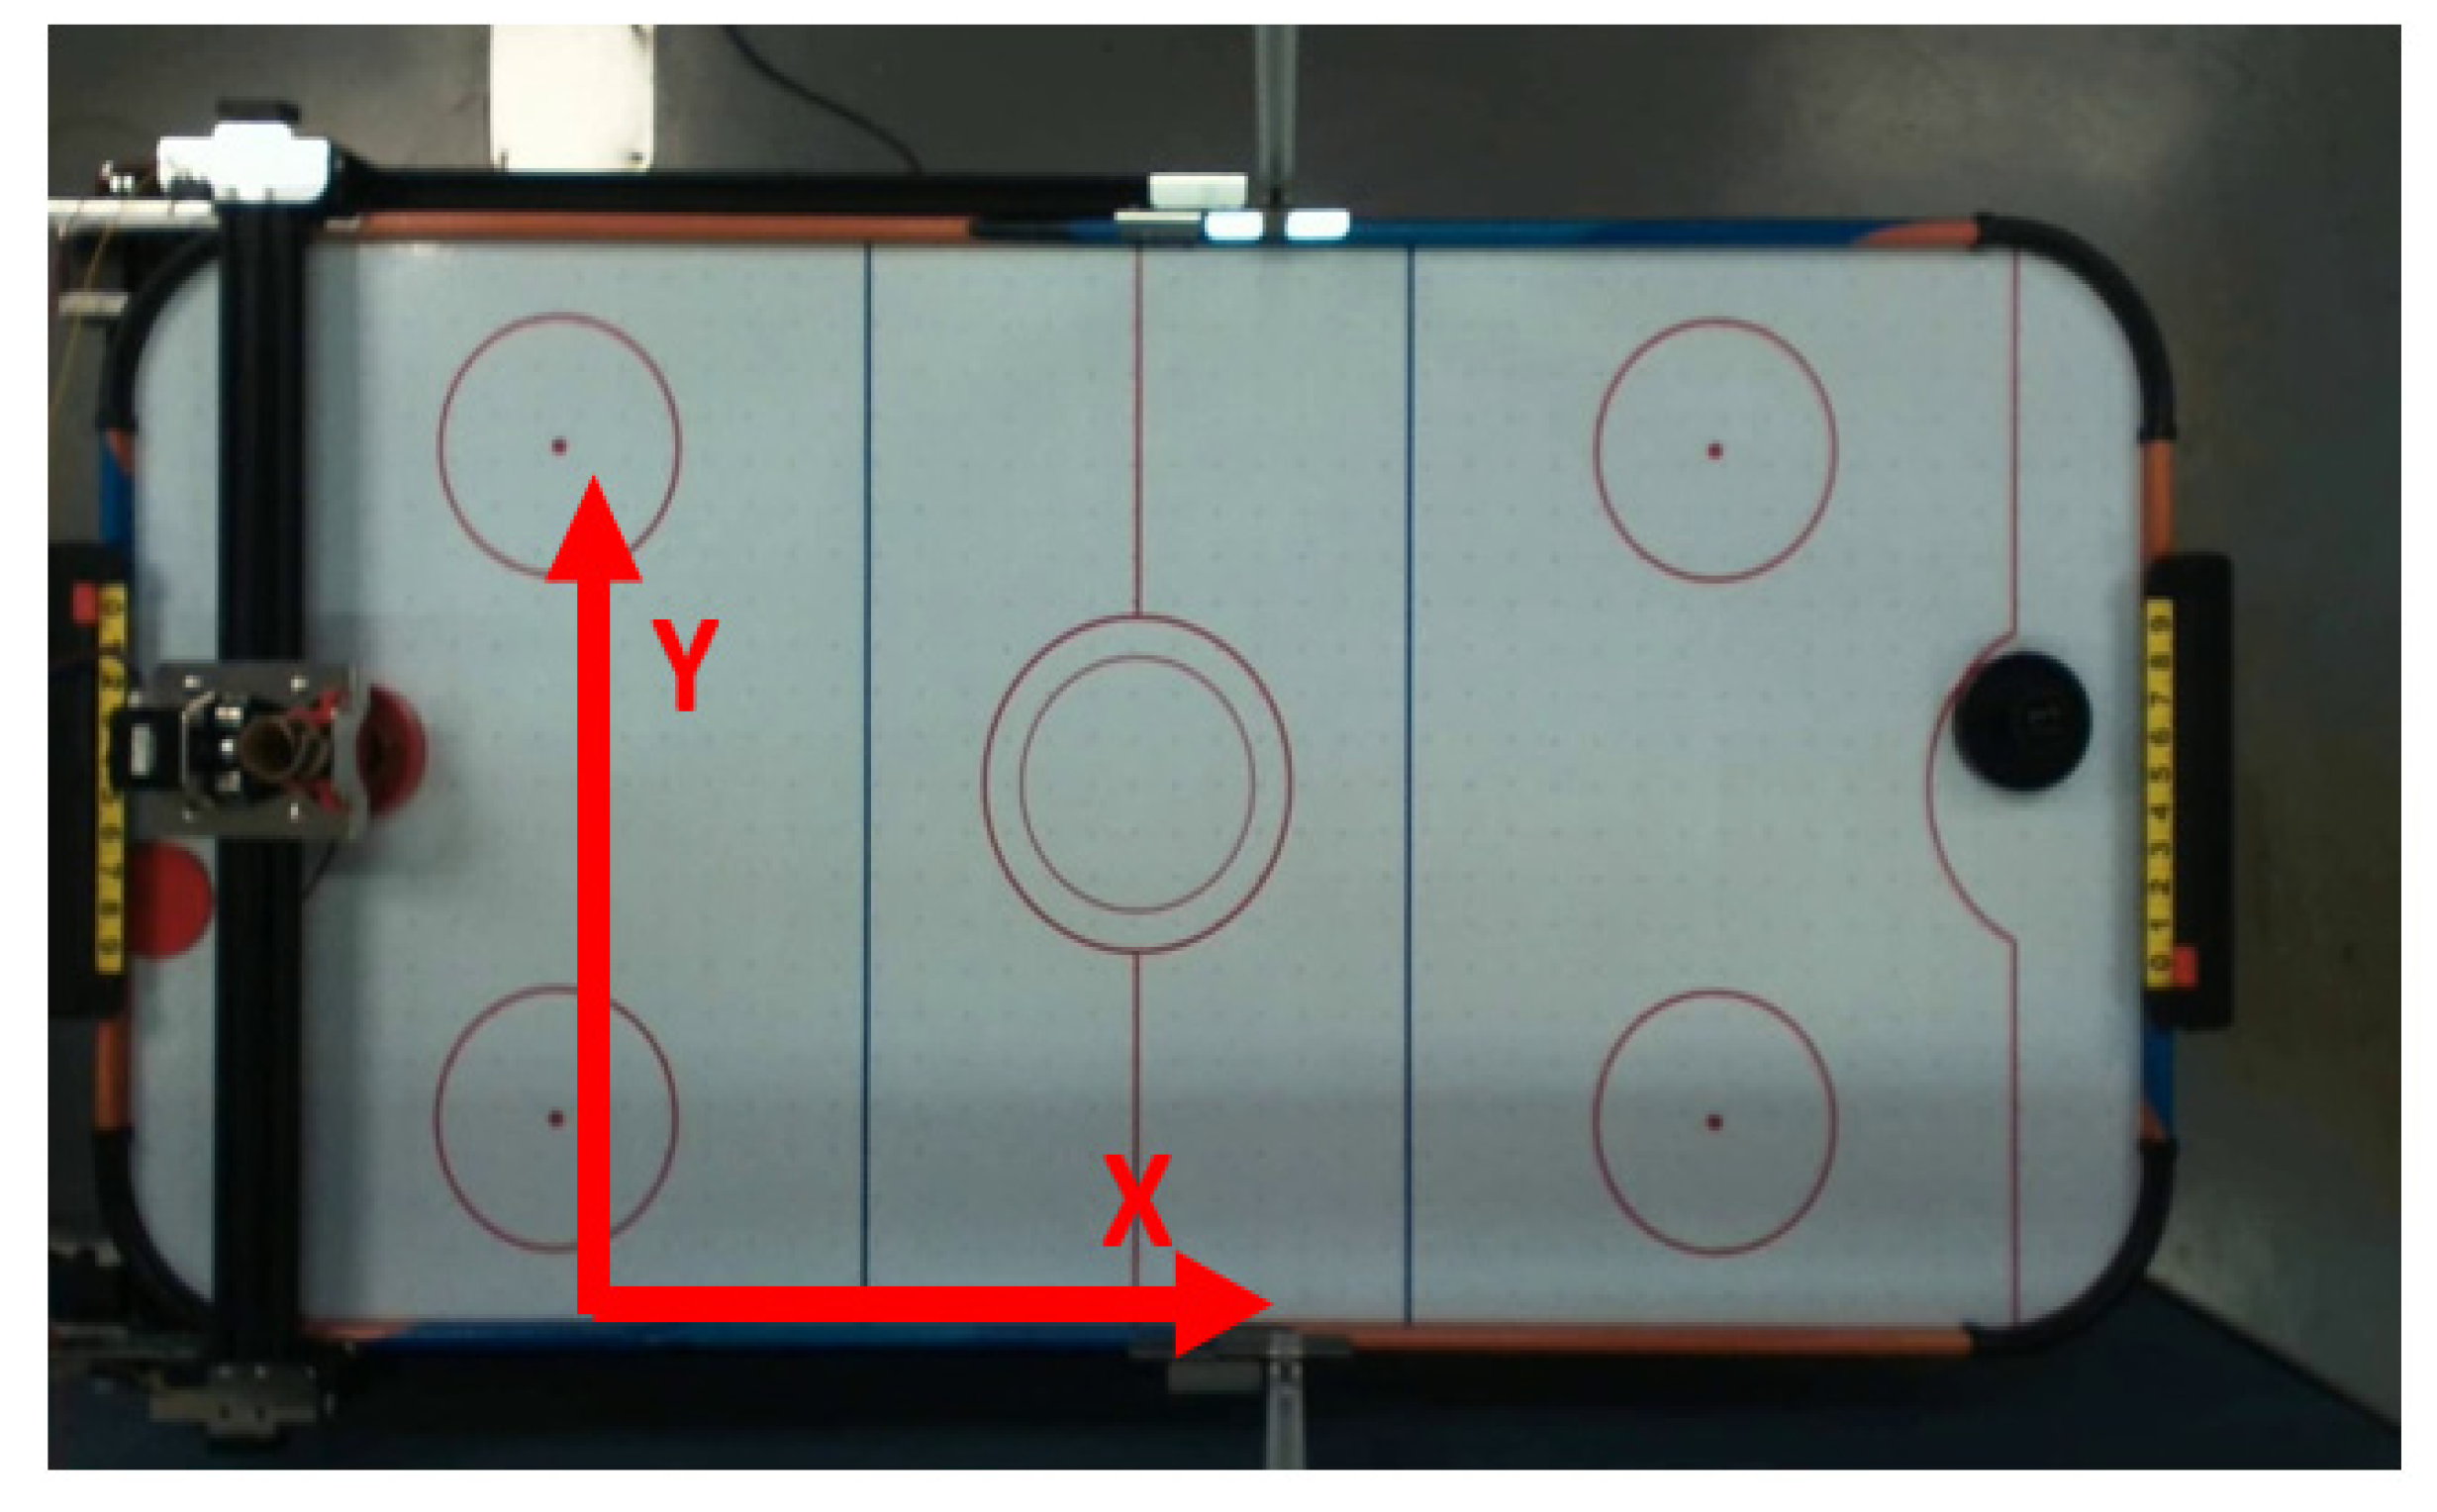 Sensors | Full-Text | Application of Machine Learning in Hockey Interactive Control System